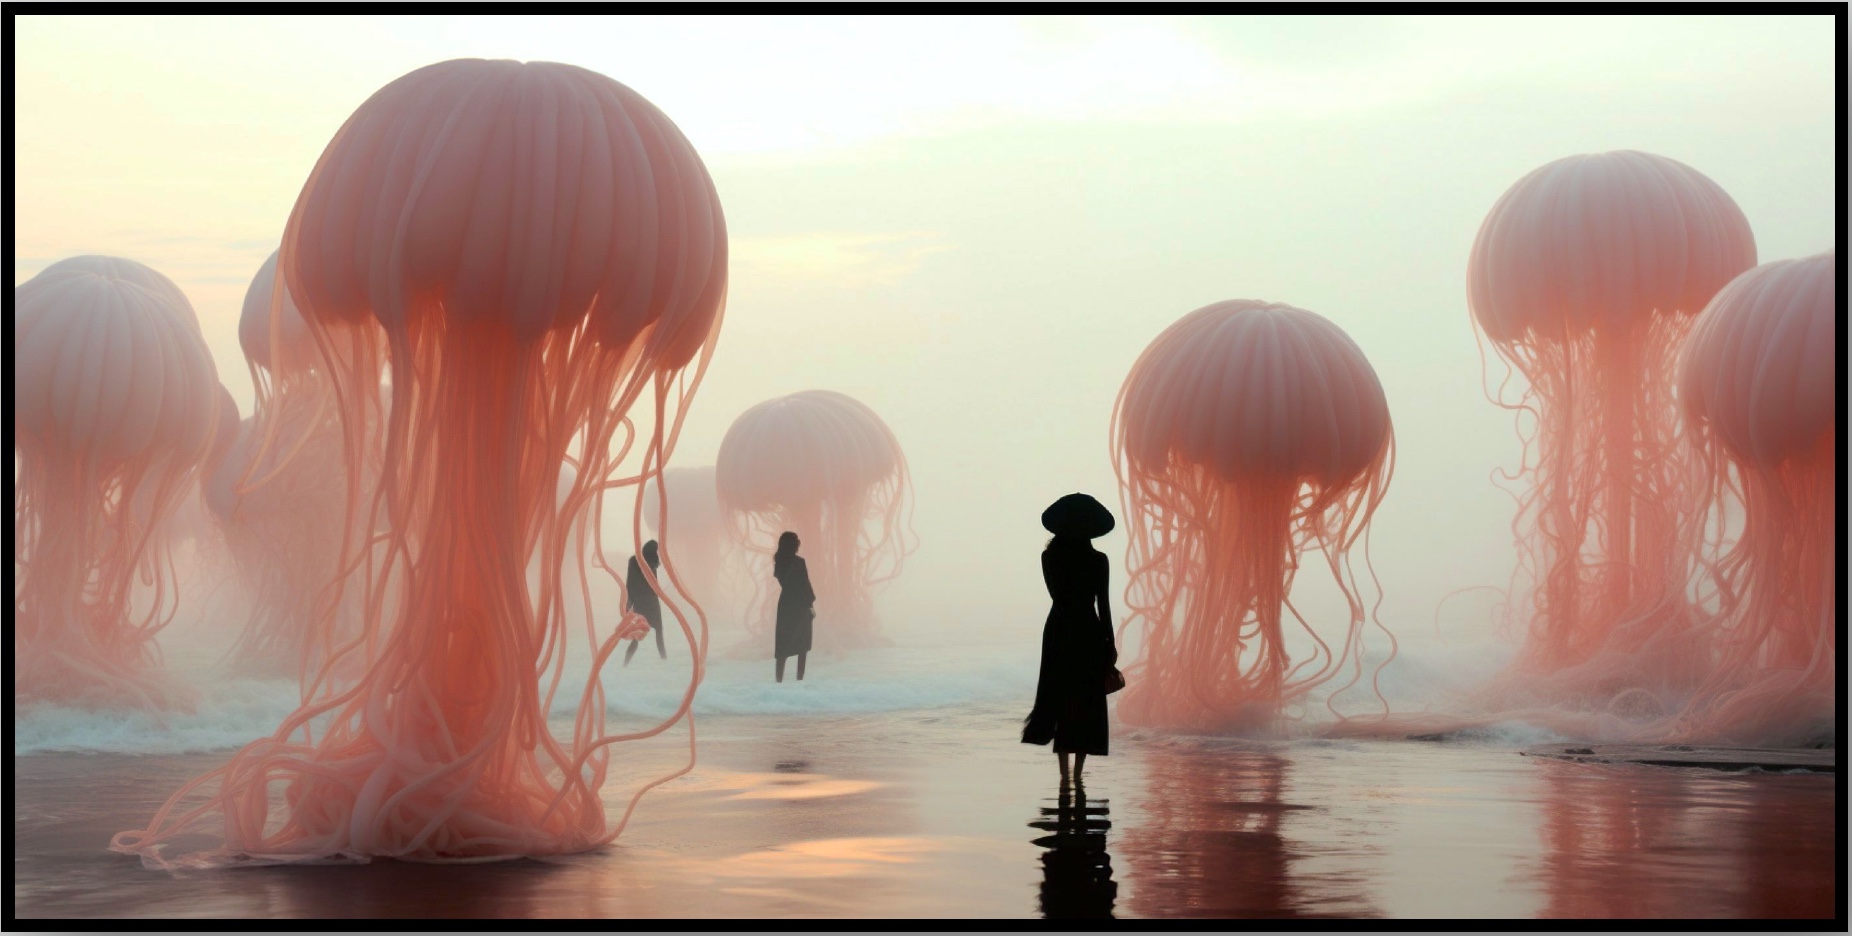 Imagine... ...a herd of pink jellyfish are playing on the beach and being watched by a few people